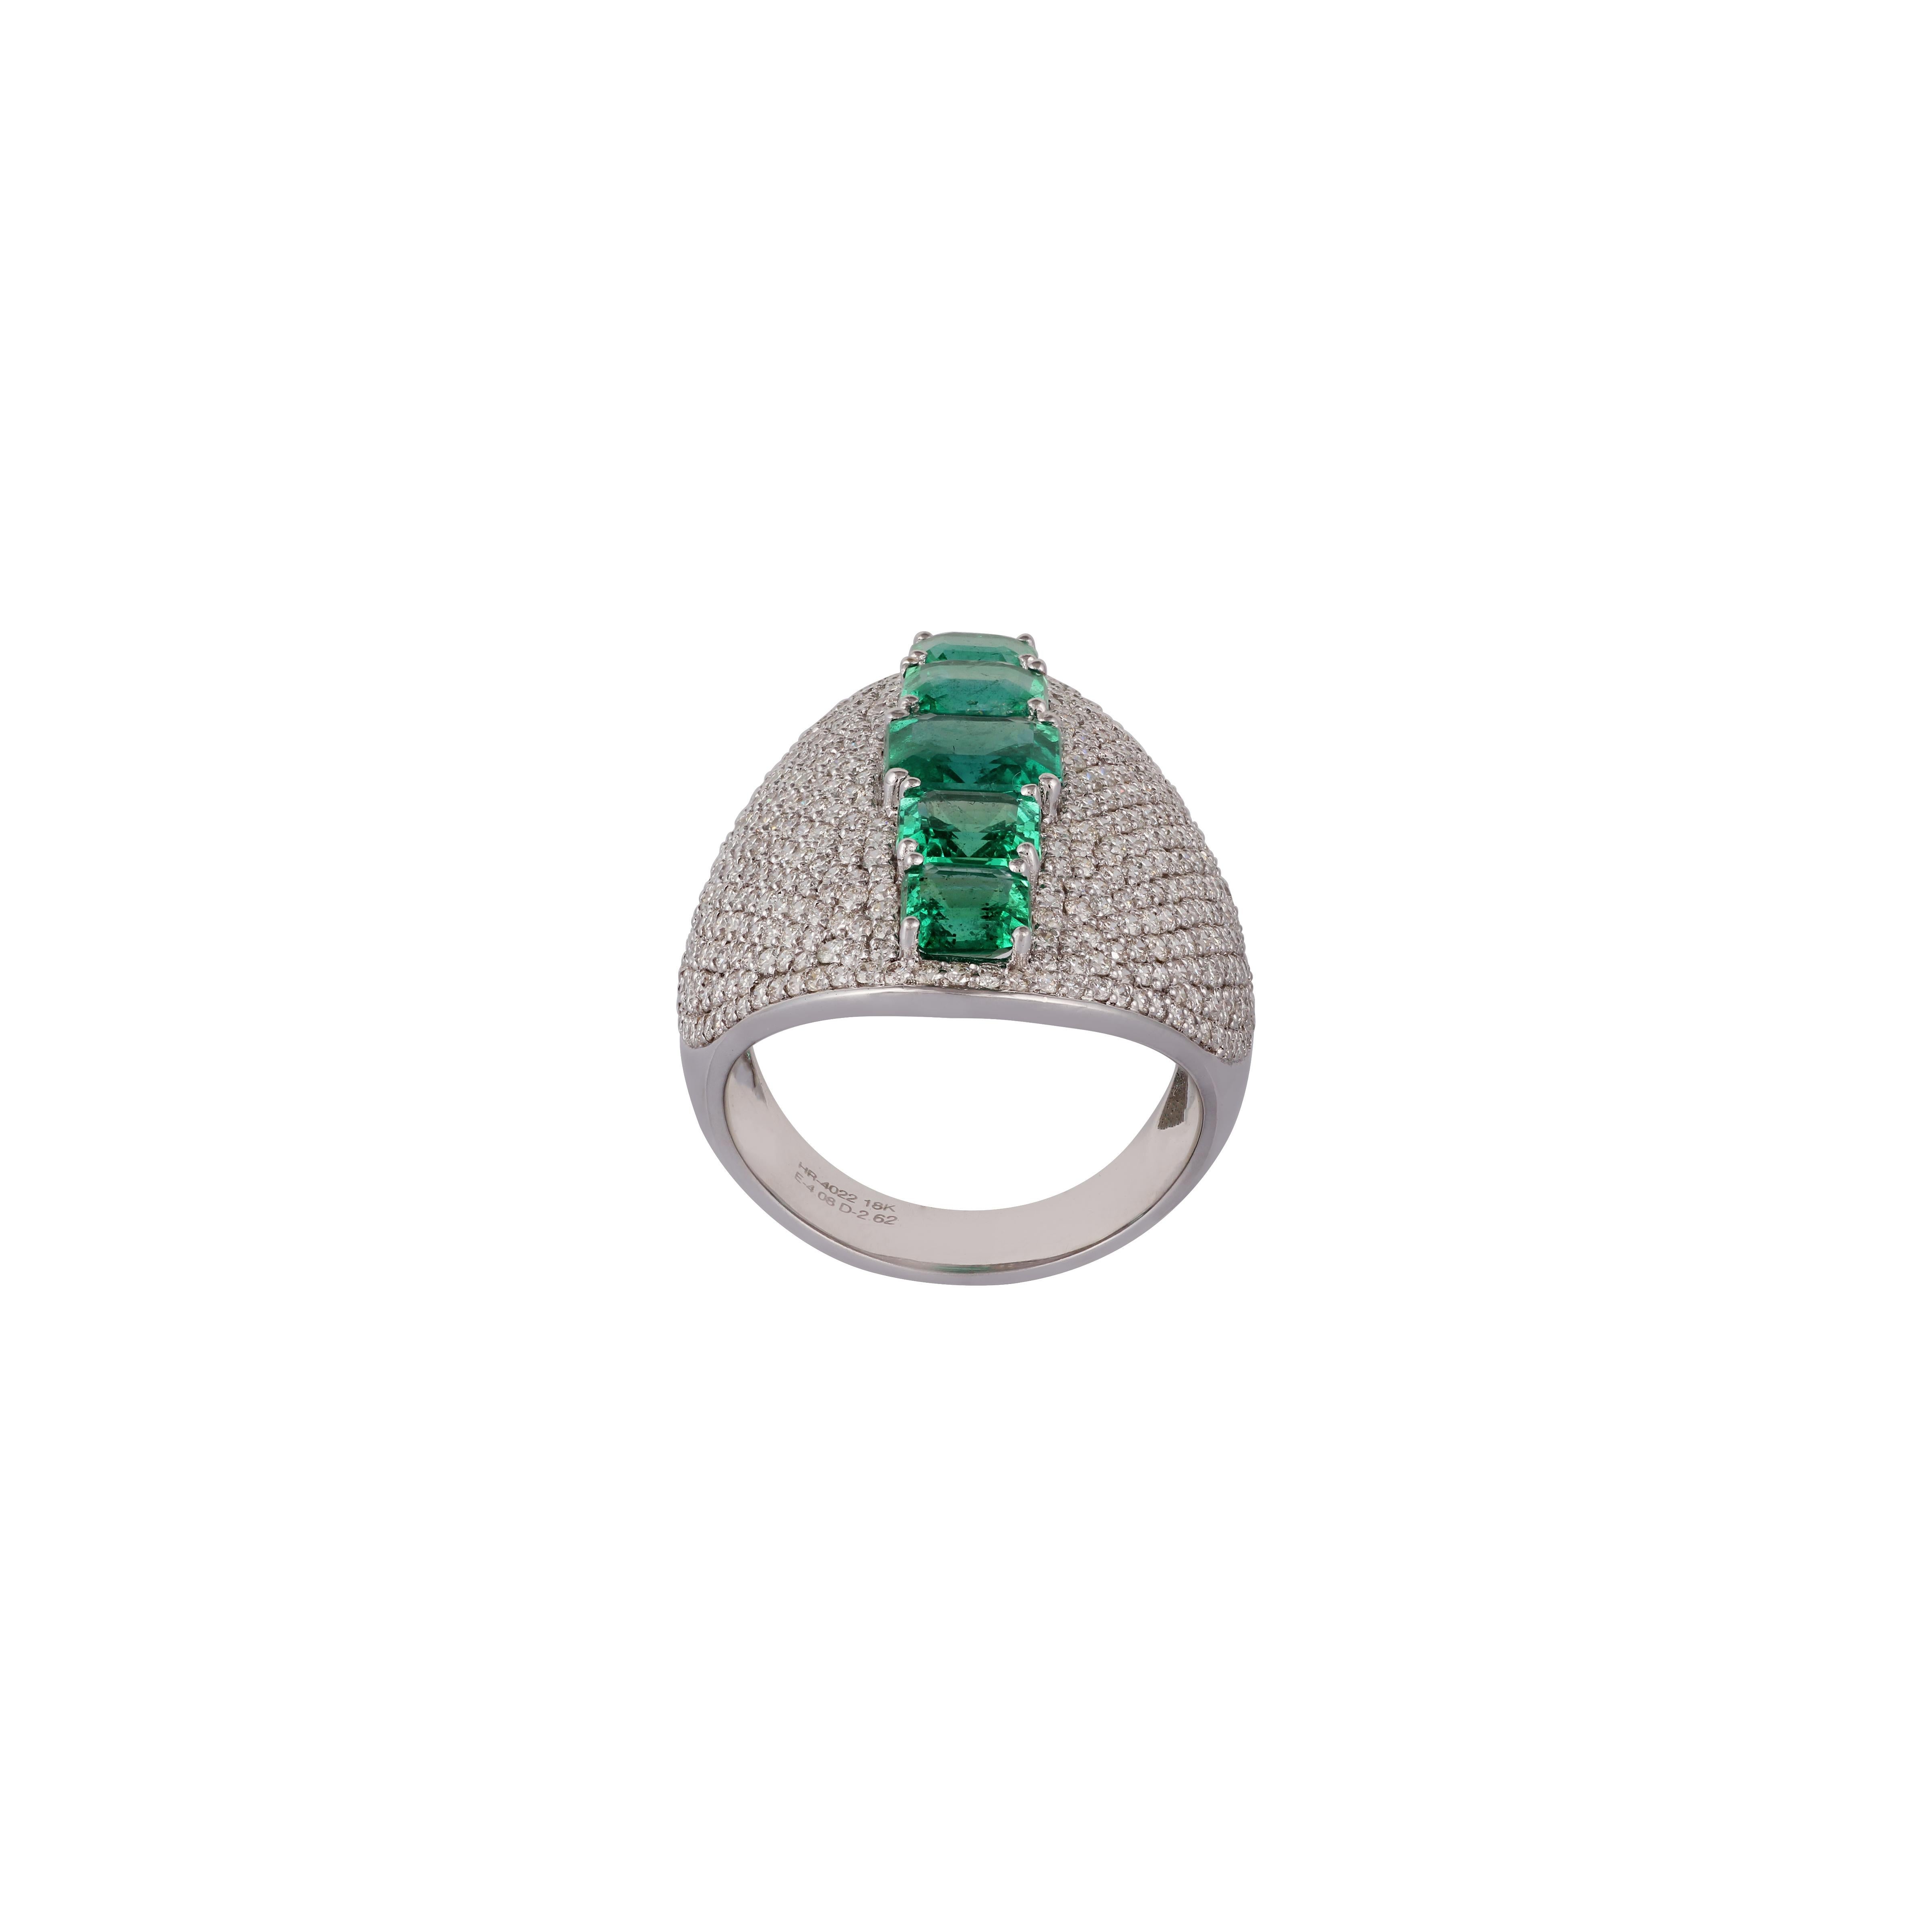 Modernist 4.06 Carat Emerald & Diamond Cocktail Ring Set in White Gold For Sale